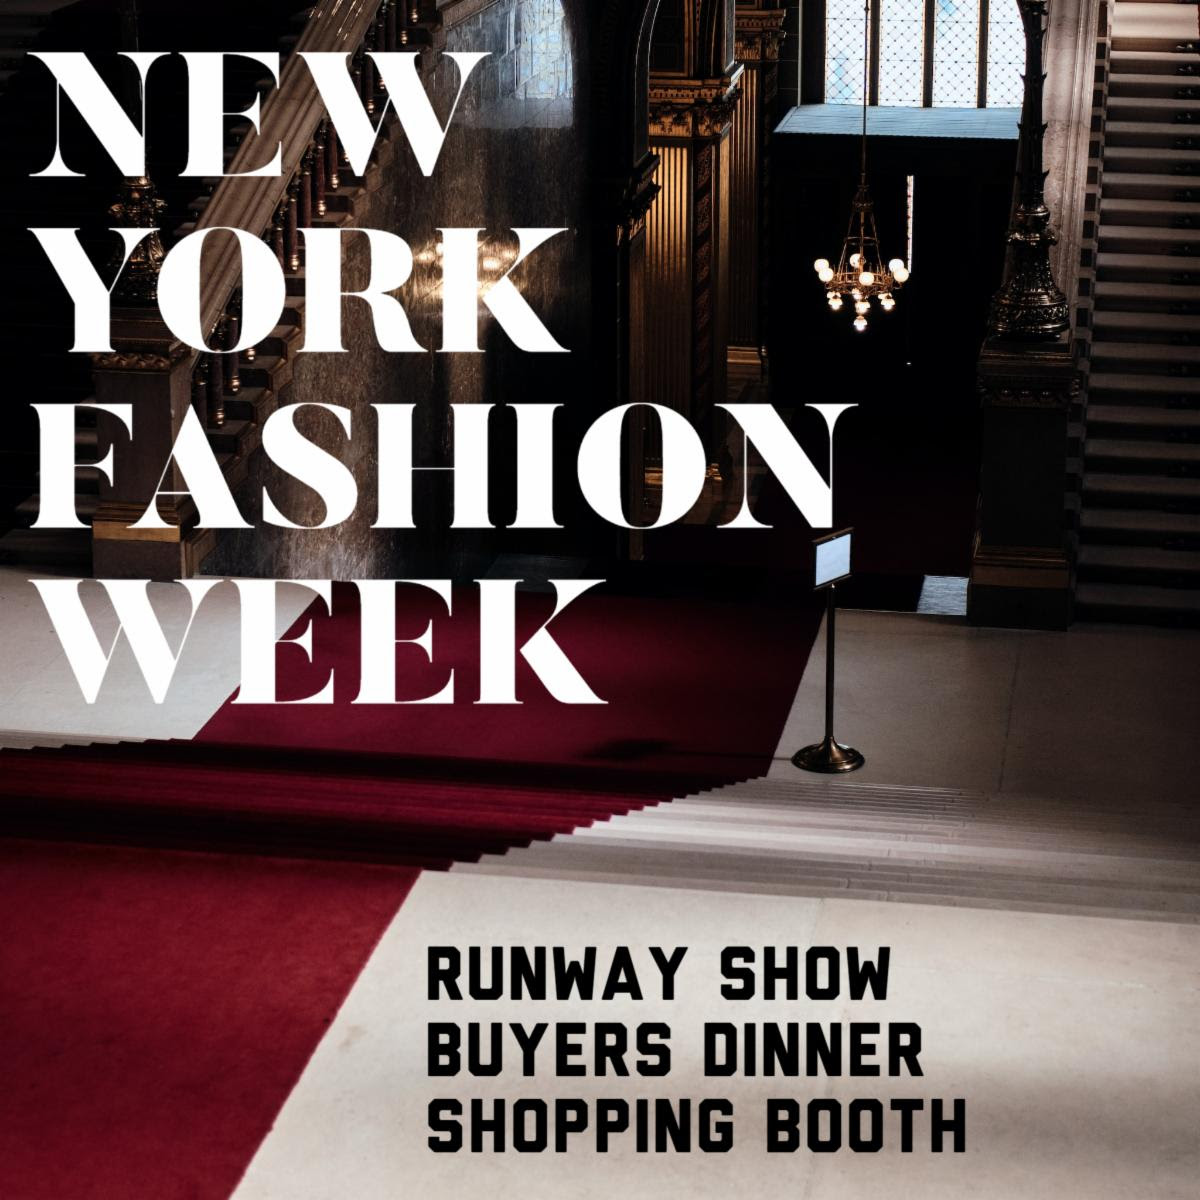 NYFW Buyers Runway Meet Buyers and Show your Collection at NEW YORK FASHION WEEK Pynck